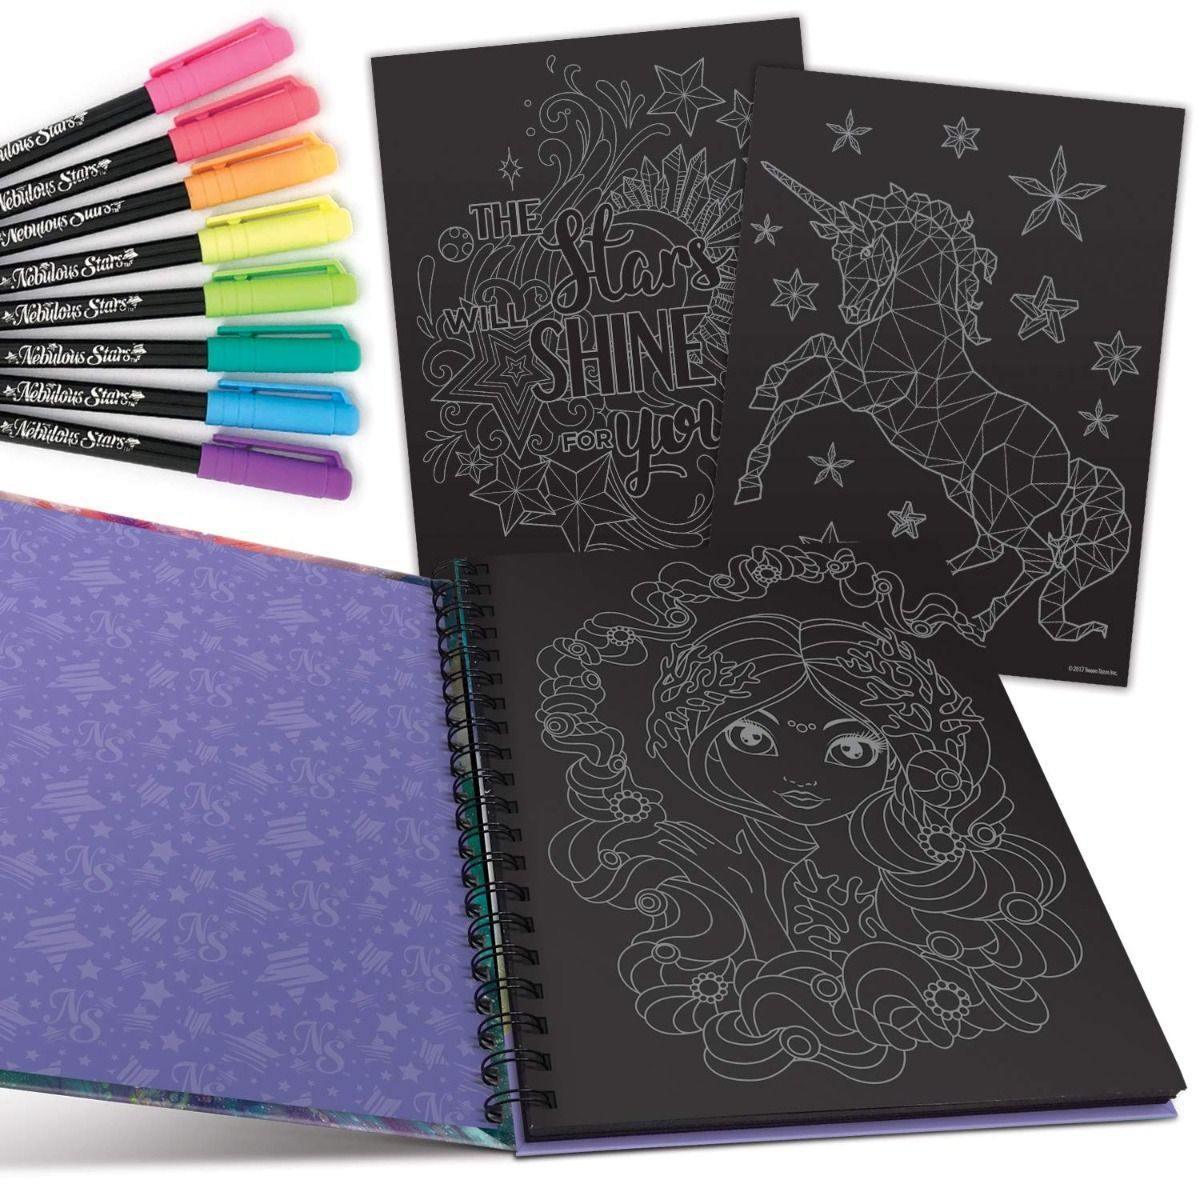 Nebulous Stars Black Pages Coloring Book - BumbleToys - 8-13 Years, Drawing & Painting, Eagle Plus, Girls